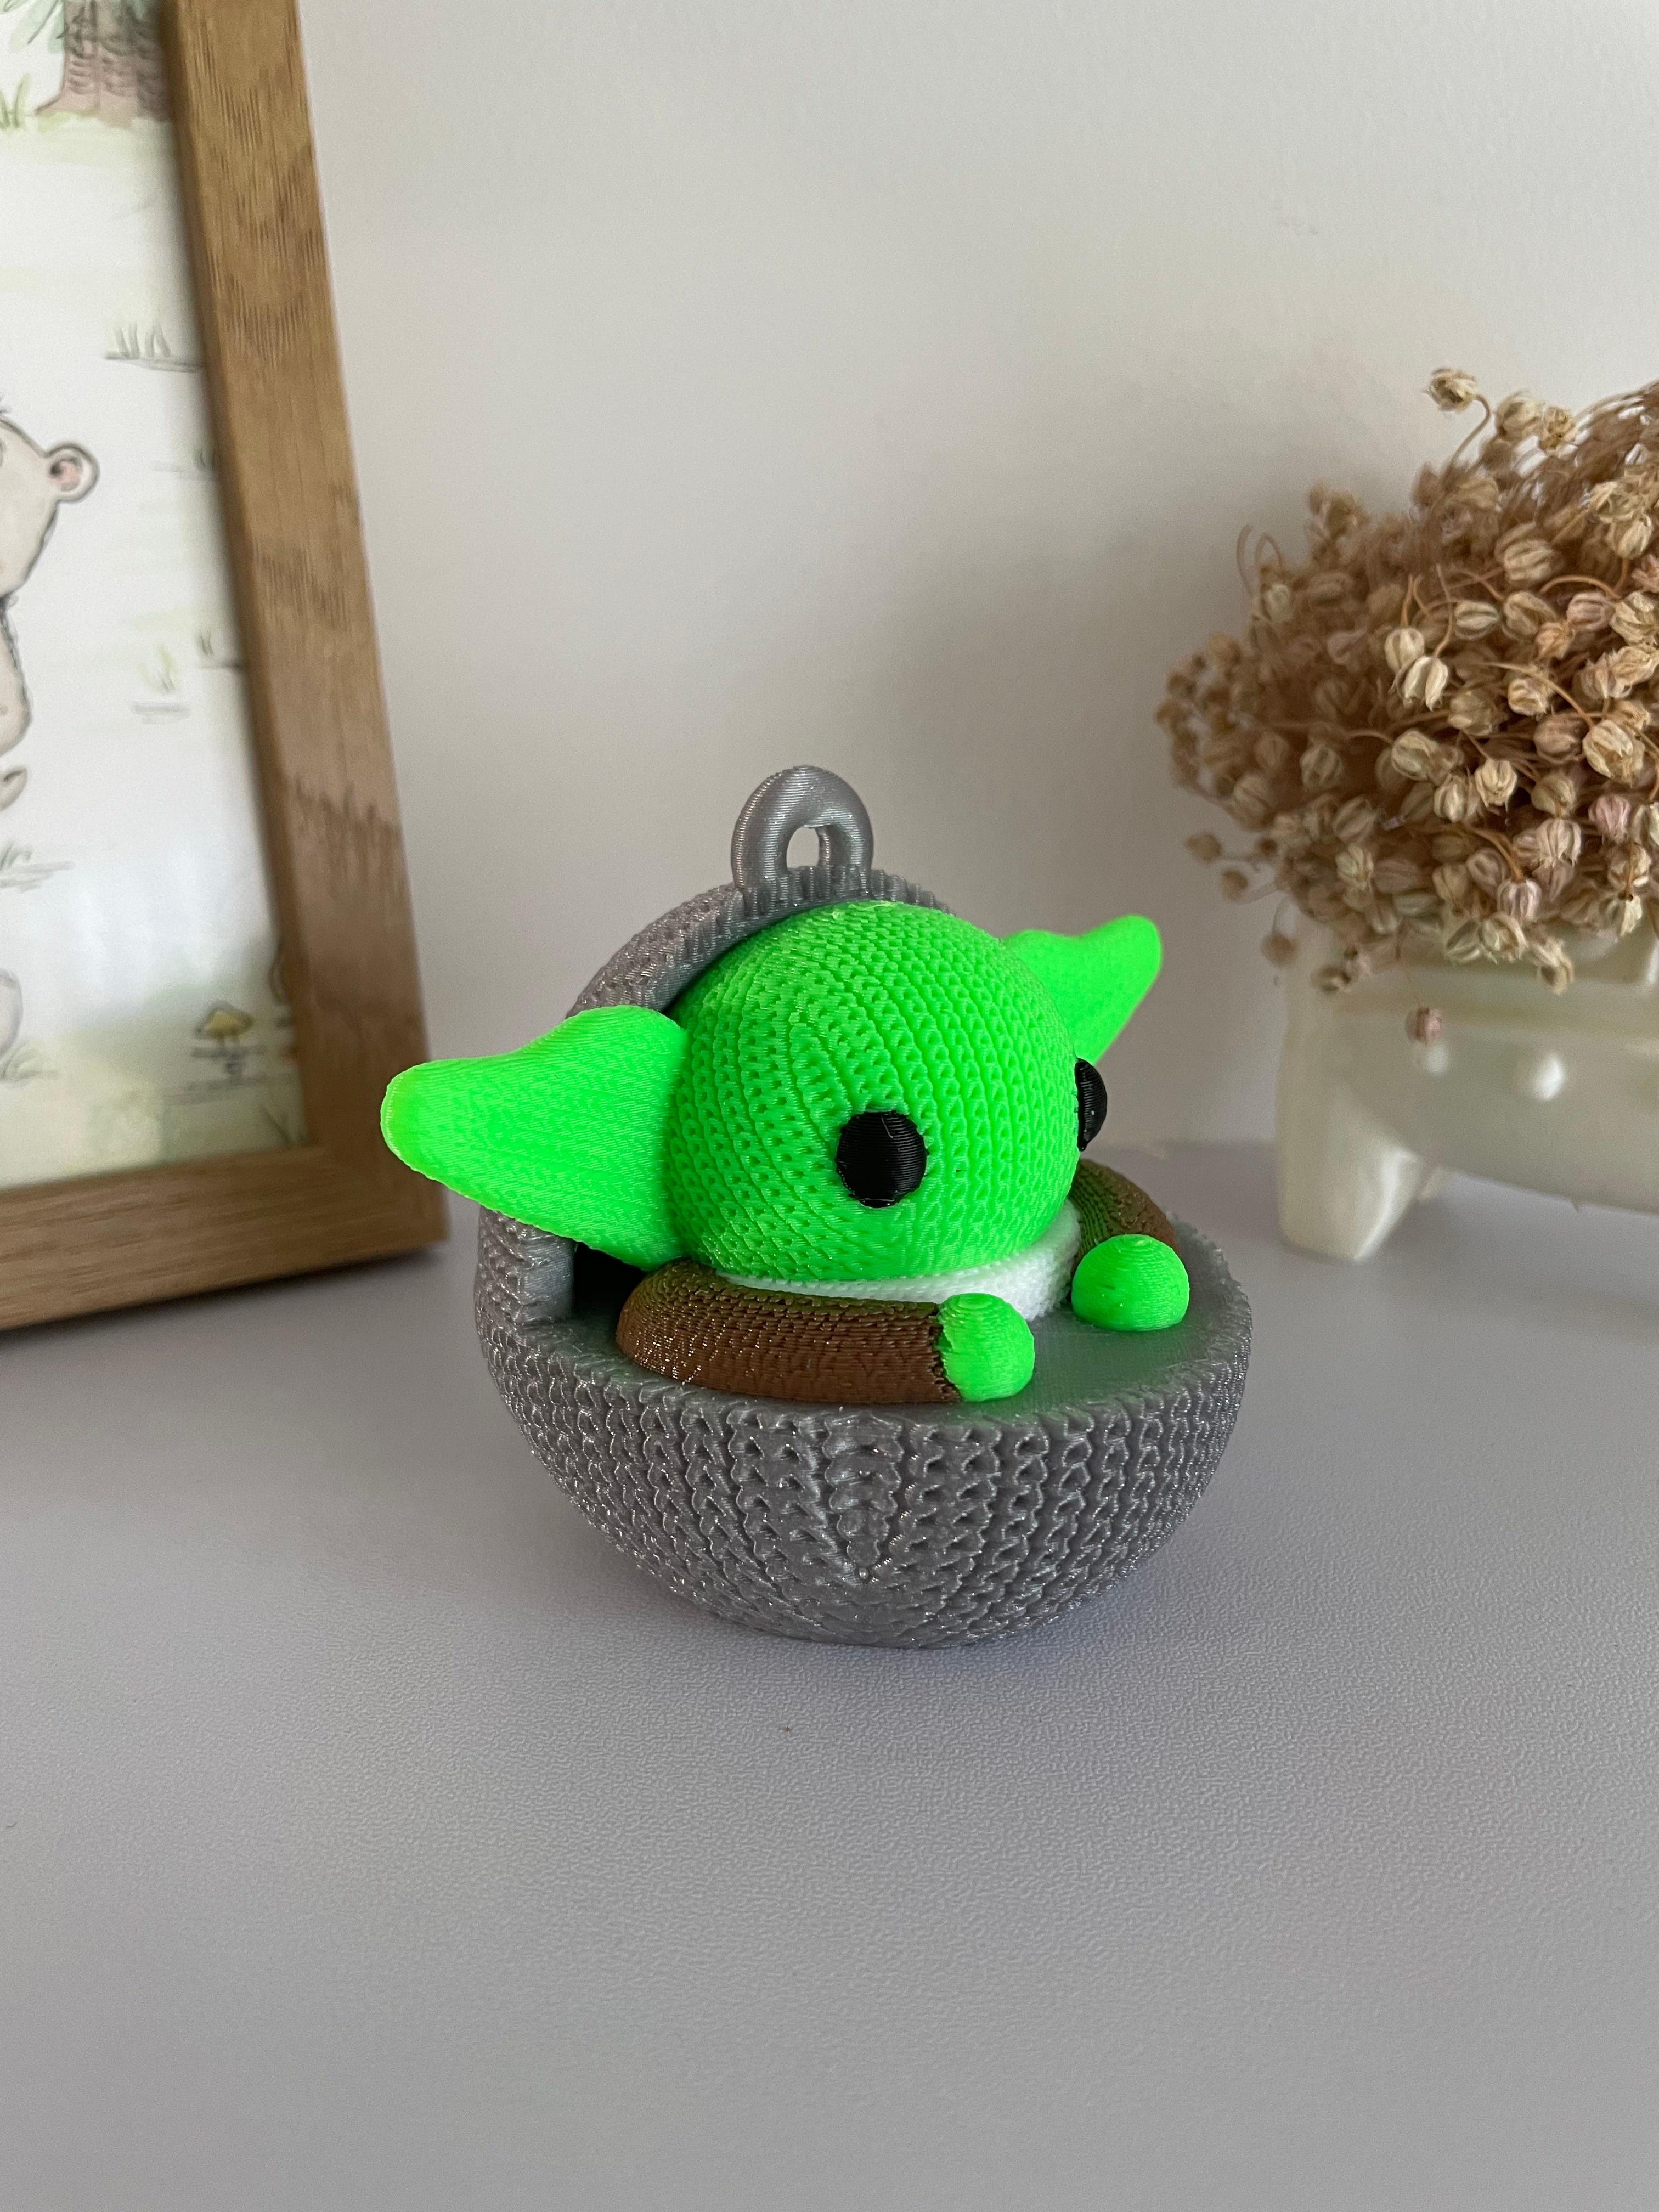 Knitted Star Wars Grogu Figurine / Ornament / No Supports / Multiparts / 3MF Included 3d model